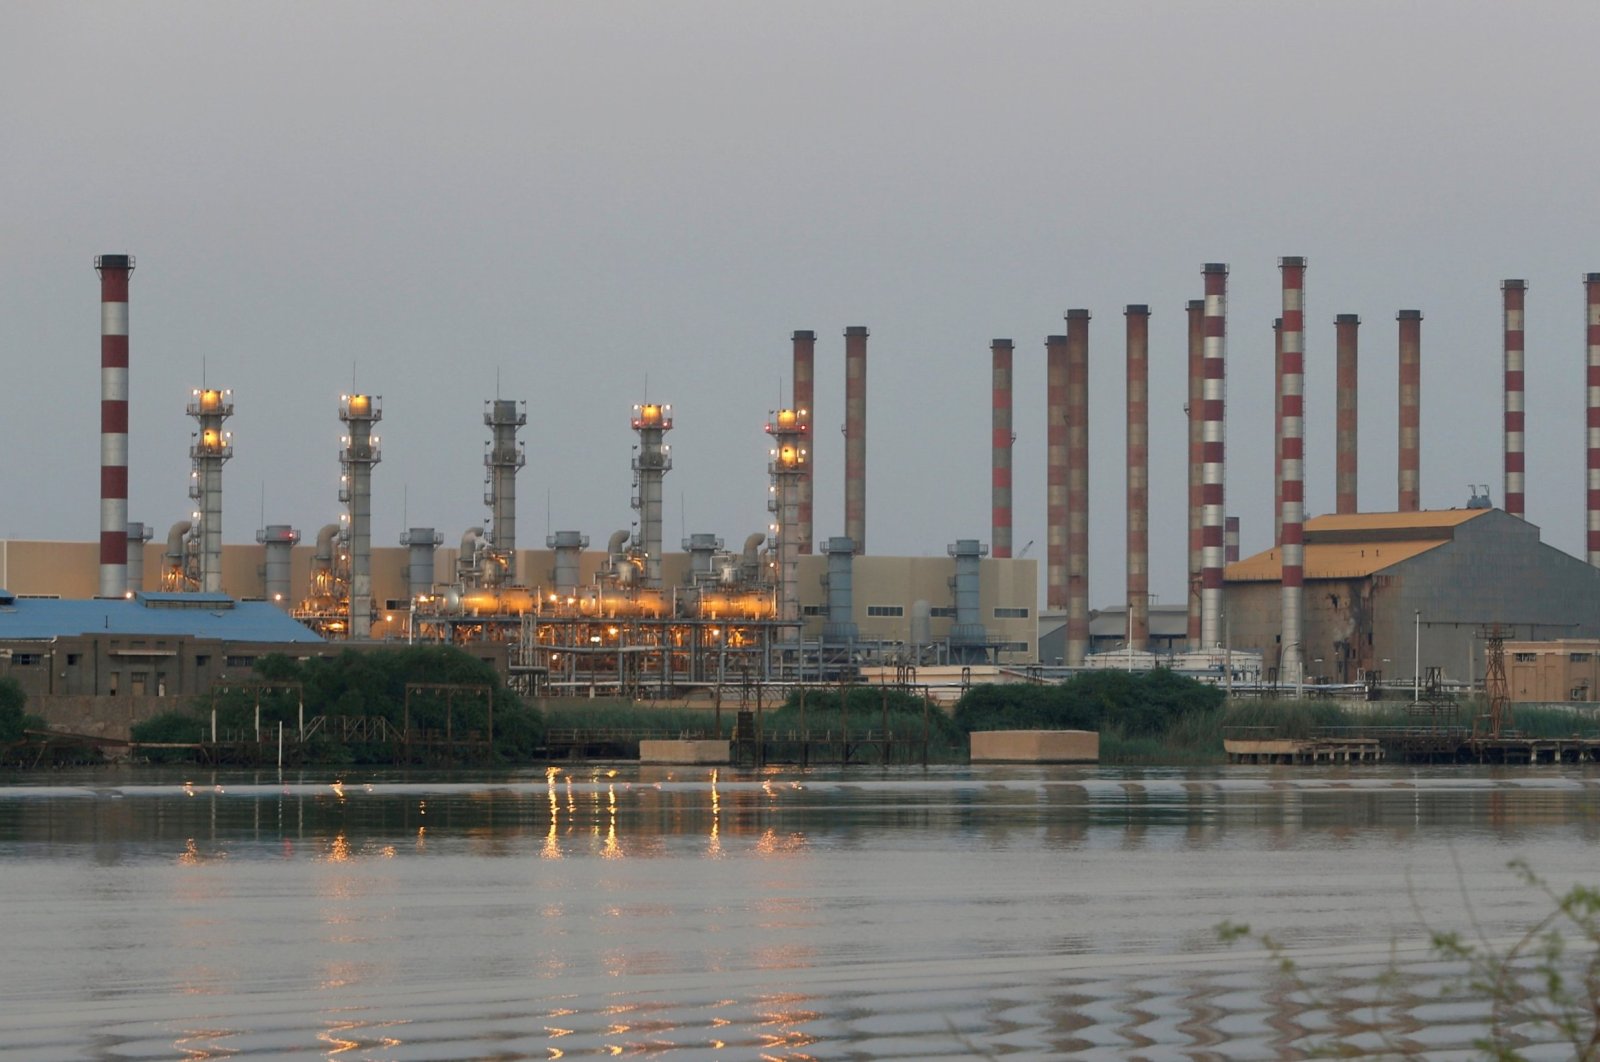 The Abadan oil refinery in southwest Iran pictured from the Iraqi side of Shatt al-Arab waterway south of Basra, Iraq, Sept. 21, 2019. (Reuters Photo)